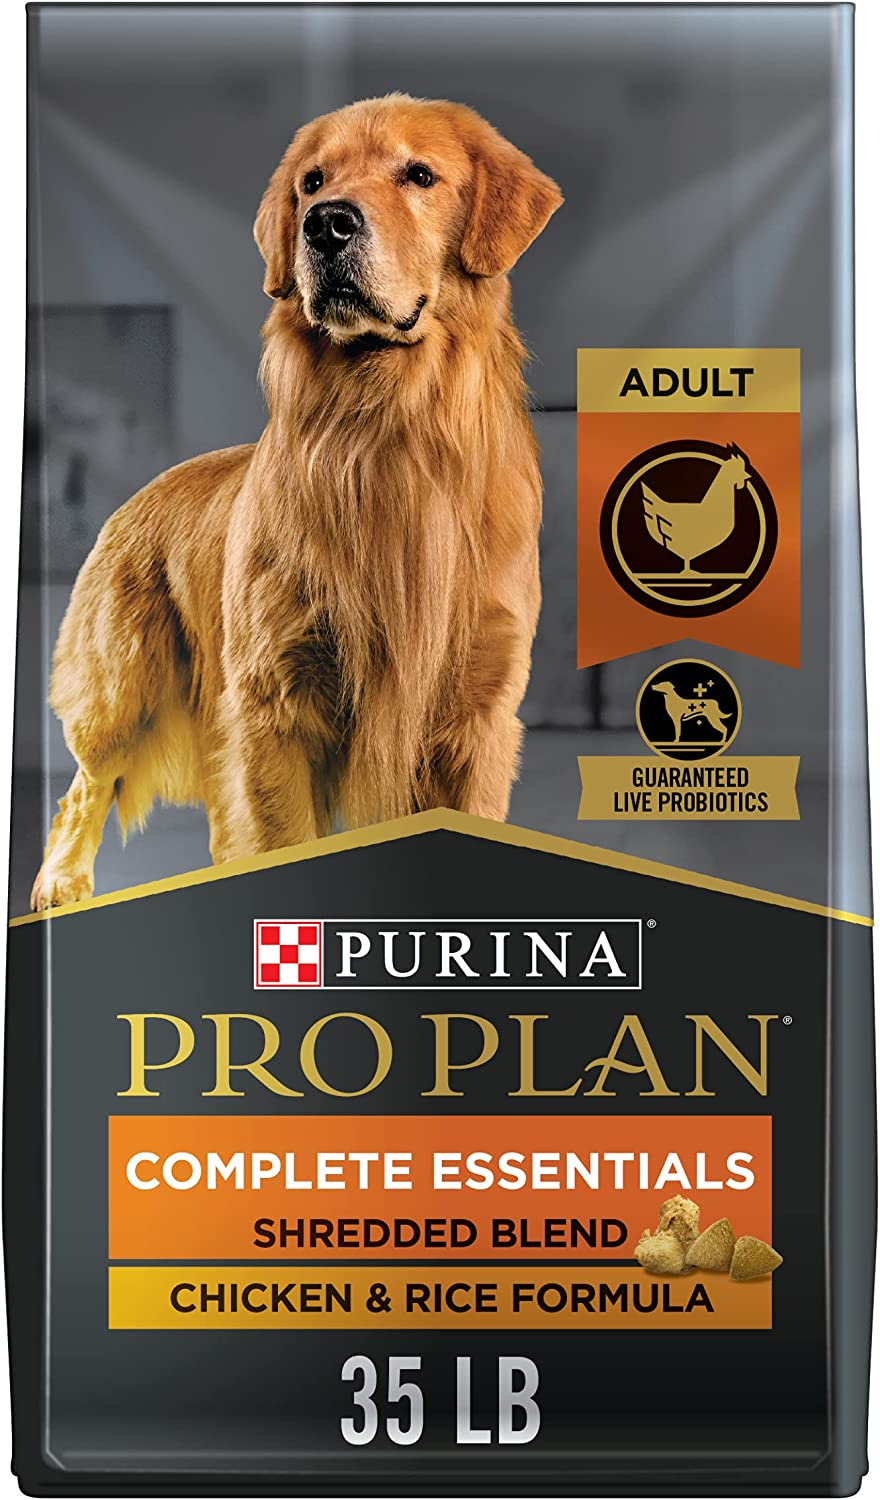 Purina Pro Plan High Protein Dog Food With Probiotics for Dogs 35 LB